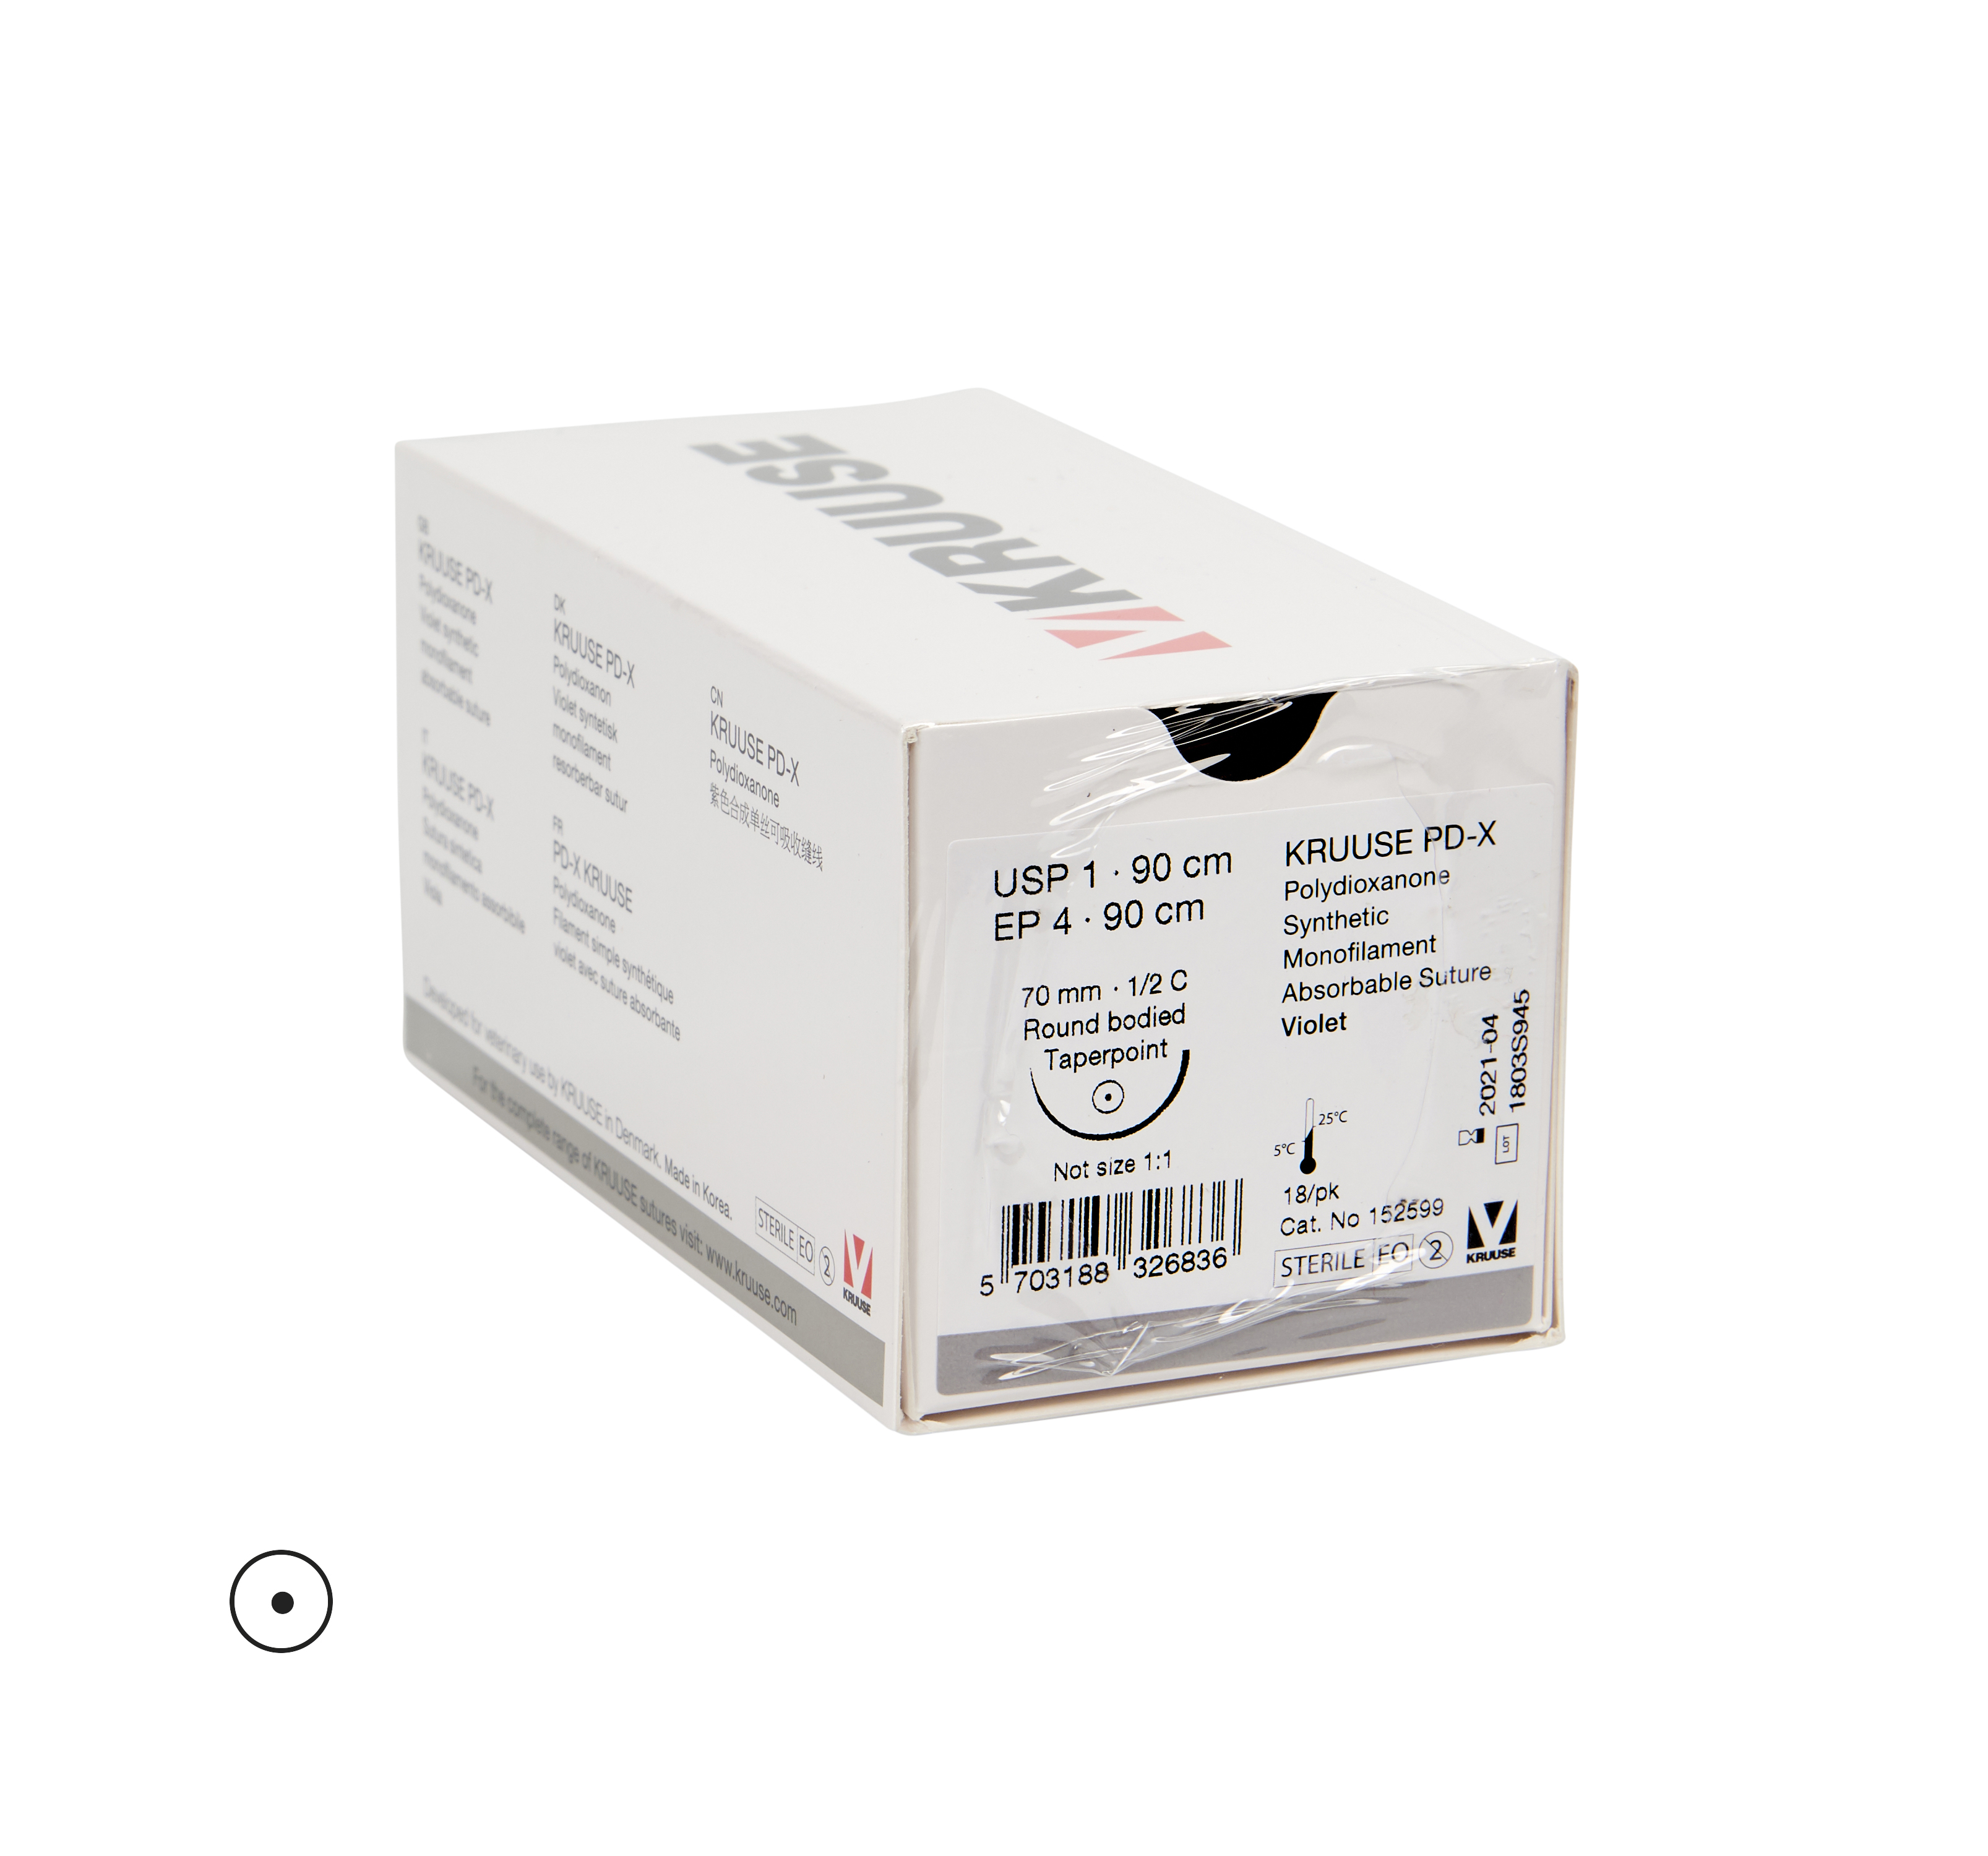 KRUUSE PD-X suture, USP 1/EP 4, 90 cm. Needle: 70 mml, ½ C, RB taperpoint, 18/pk